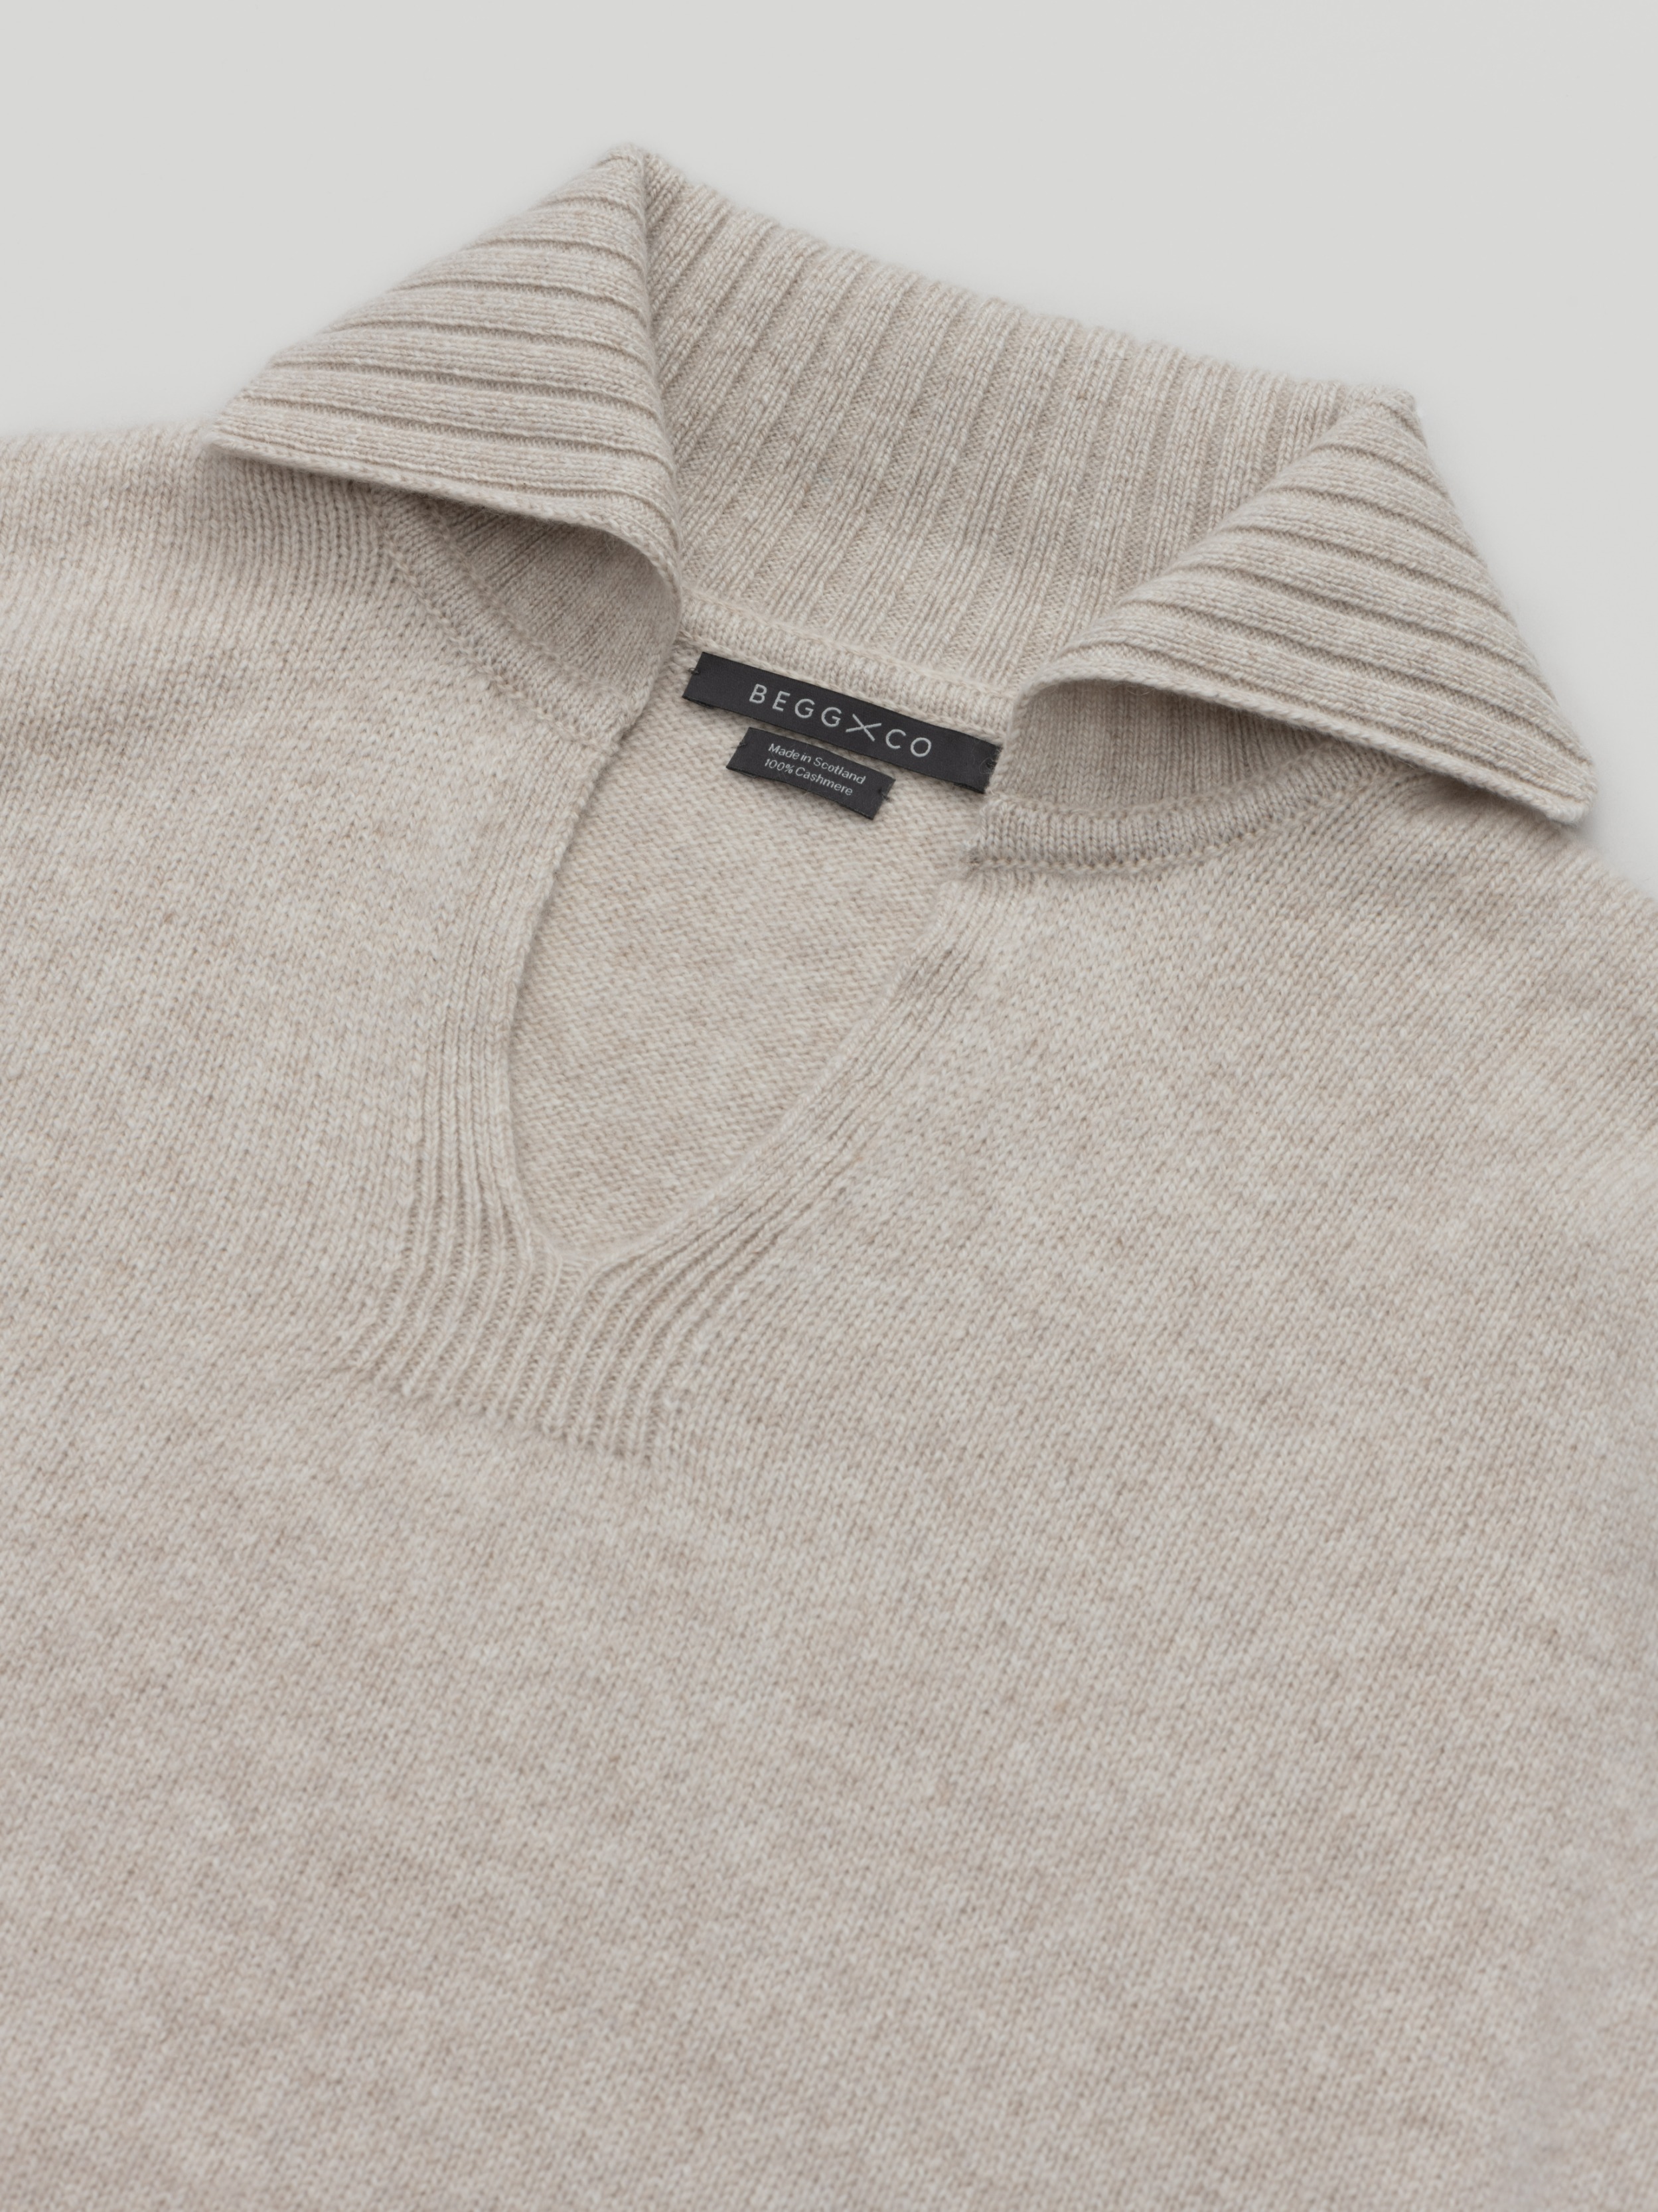 Women's Luxury Cashmere Accessories and Knitwear | Begg x Co